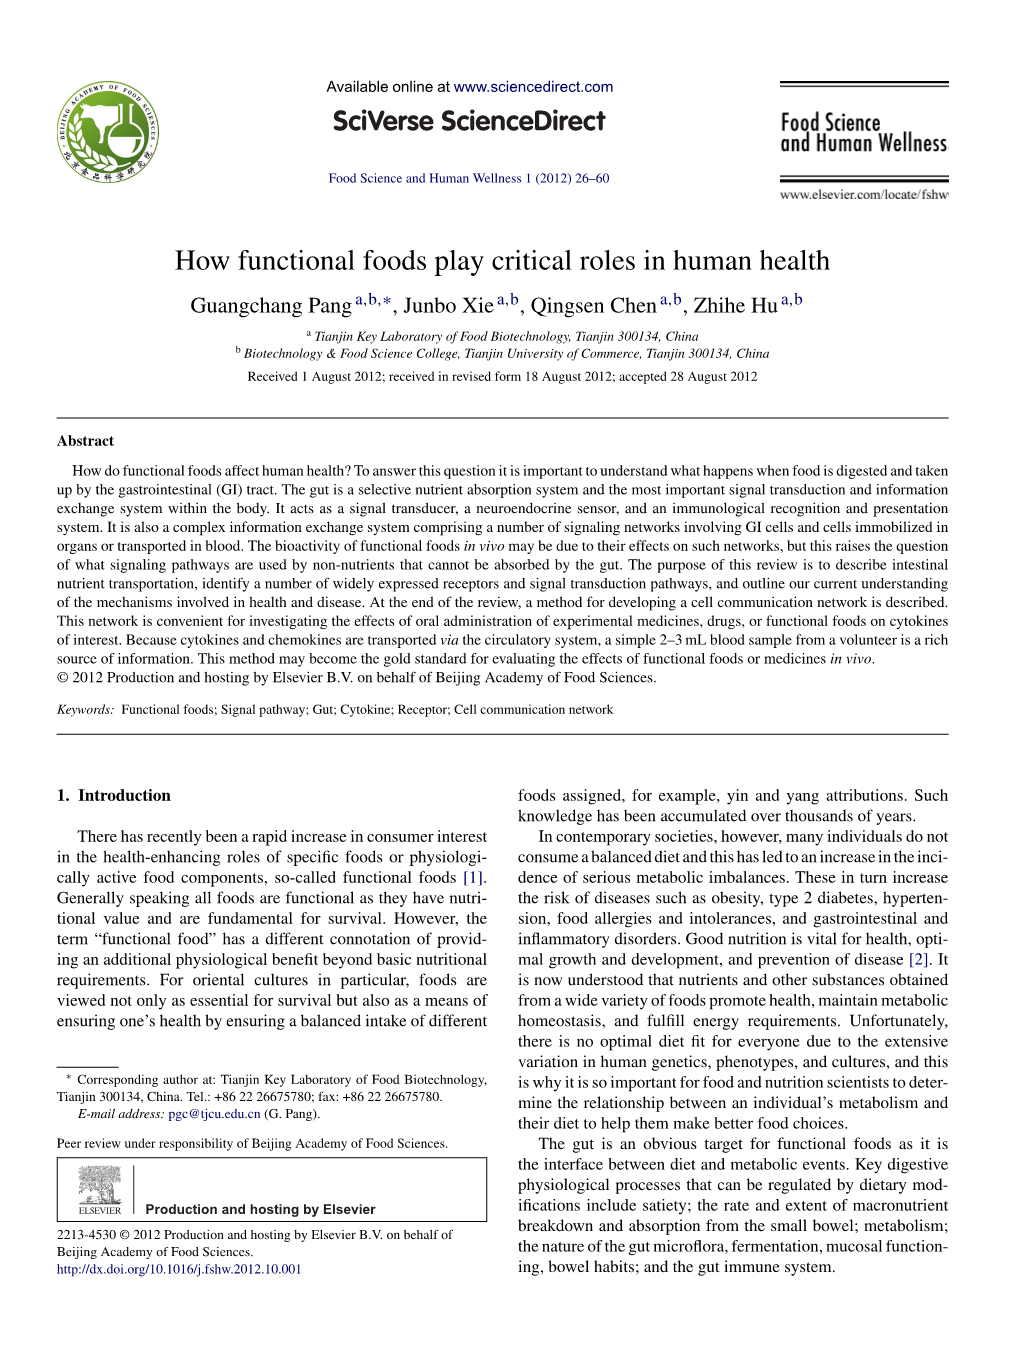 How Functional Foods Play Critical Roles in Human Health